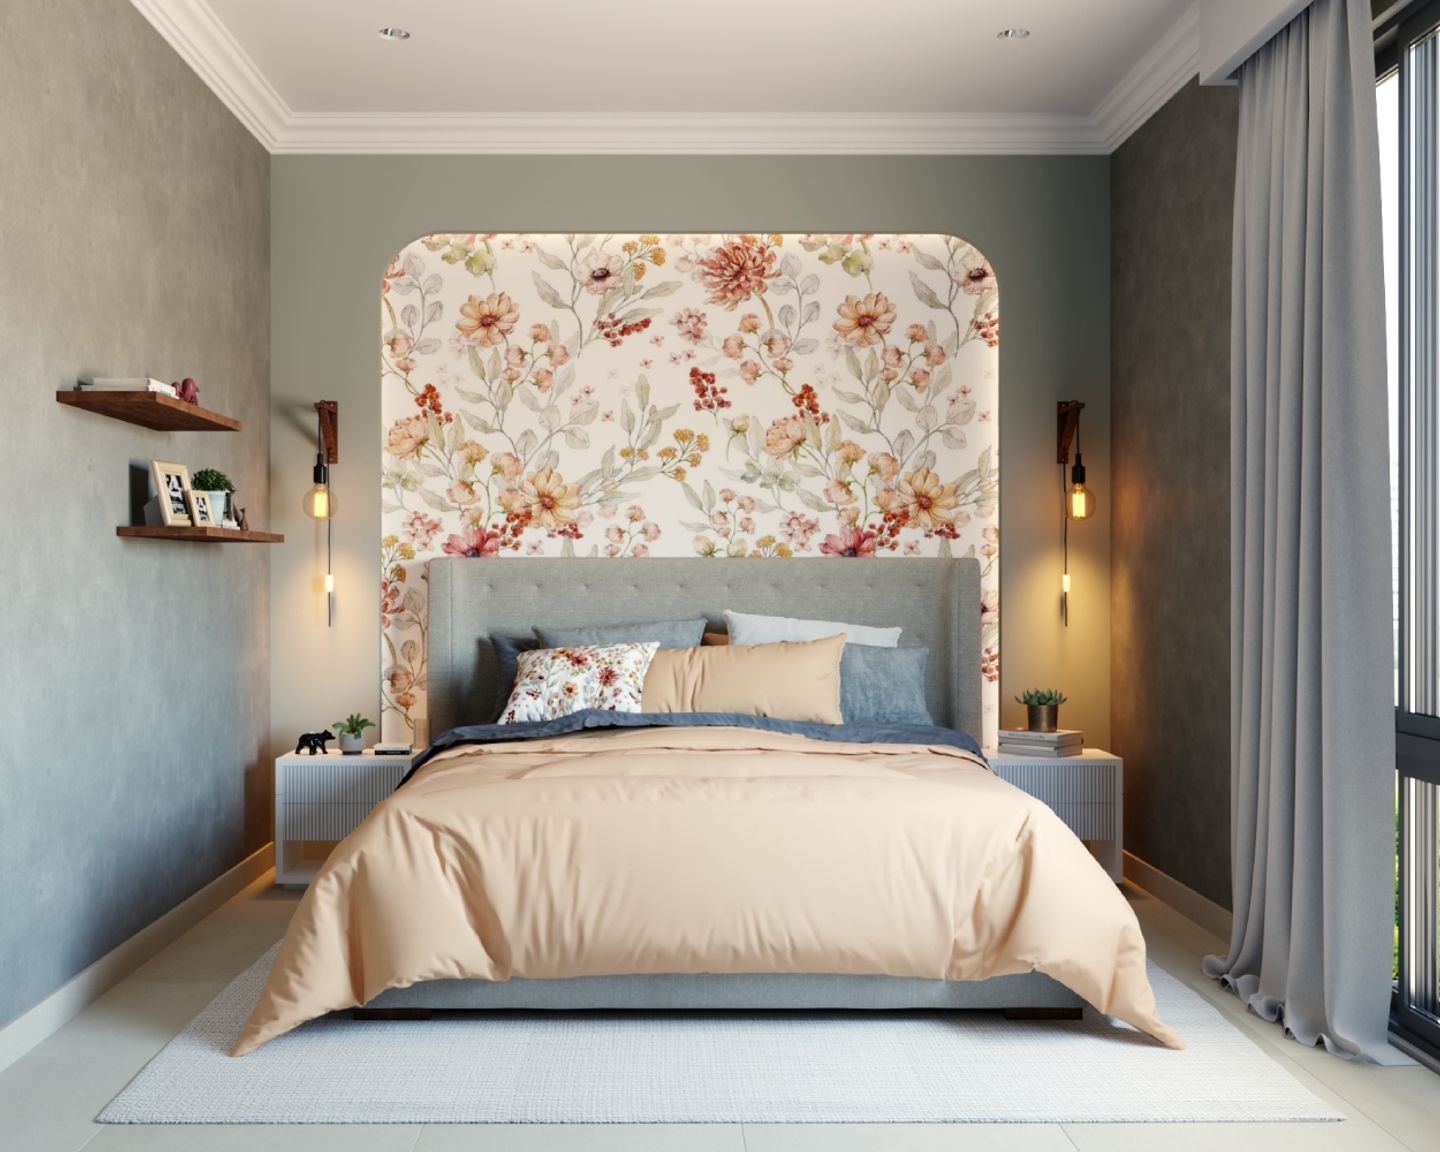 Classic Grey Master Bedroom Design With Floral Wallpaper - Livspace